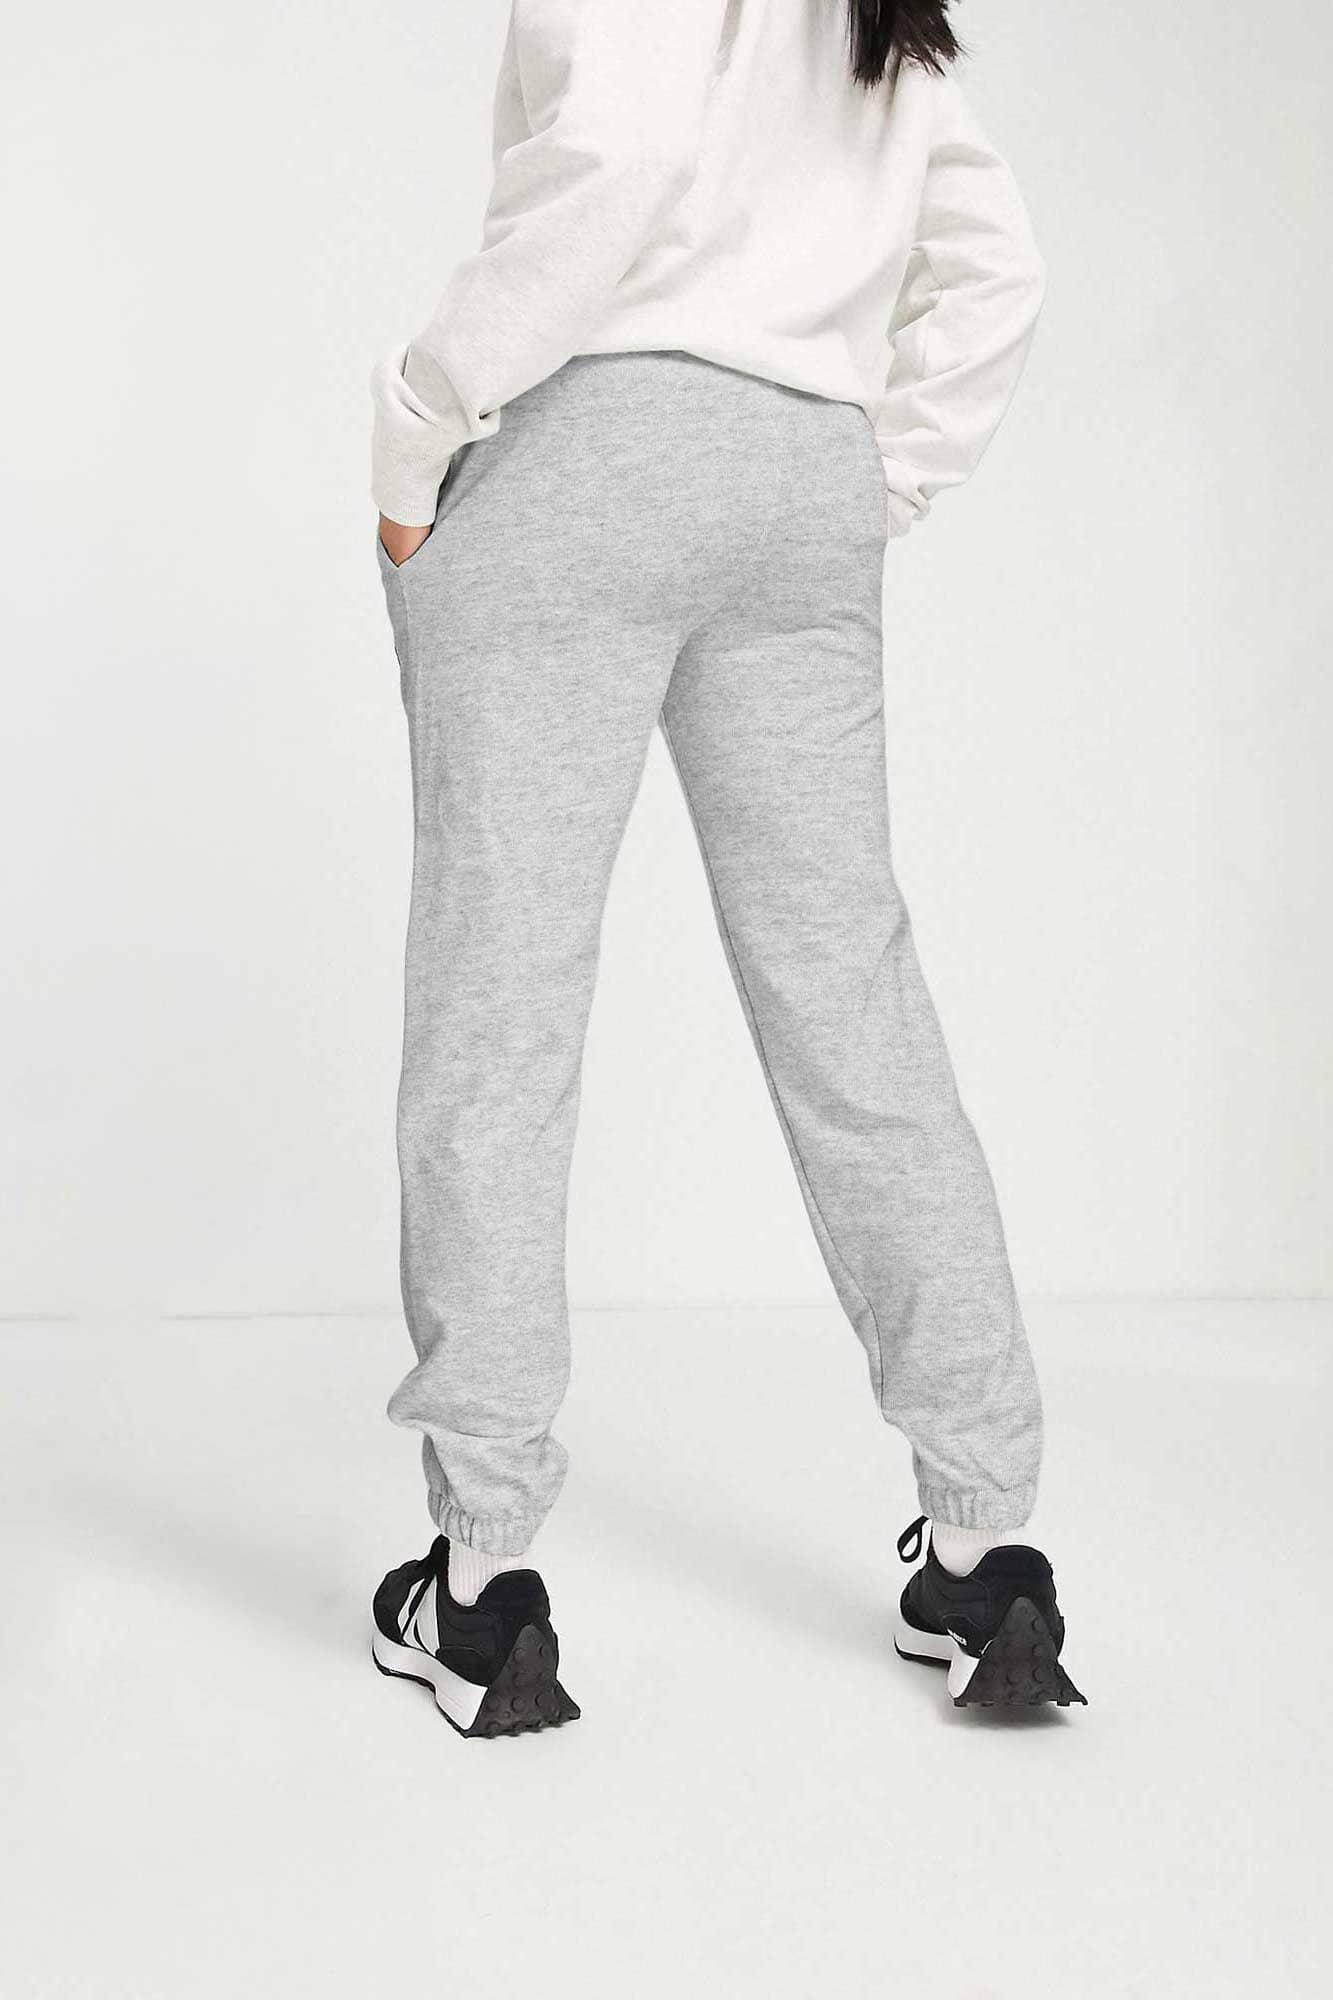 Buy Cigain 2Pcs Women's and Men's Wool Fleece Exercise Running Gym Trousers  Pajama Yoga Pants (MT1) at Amazon.in